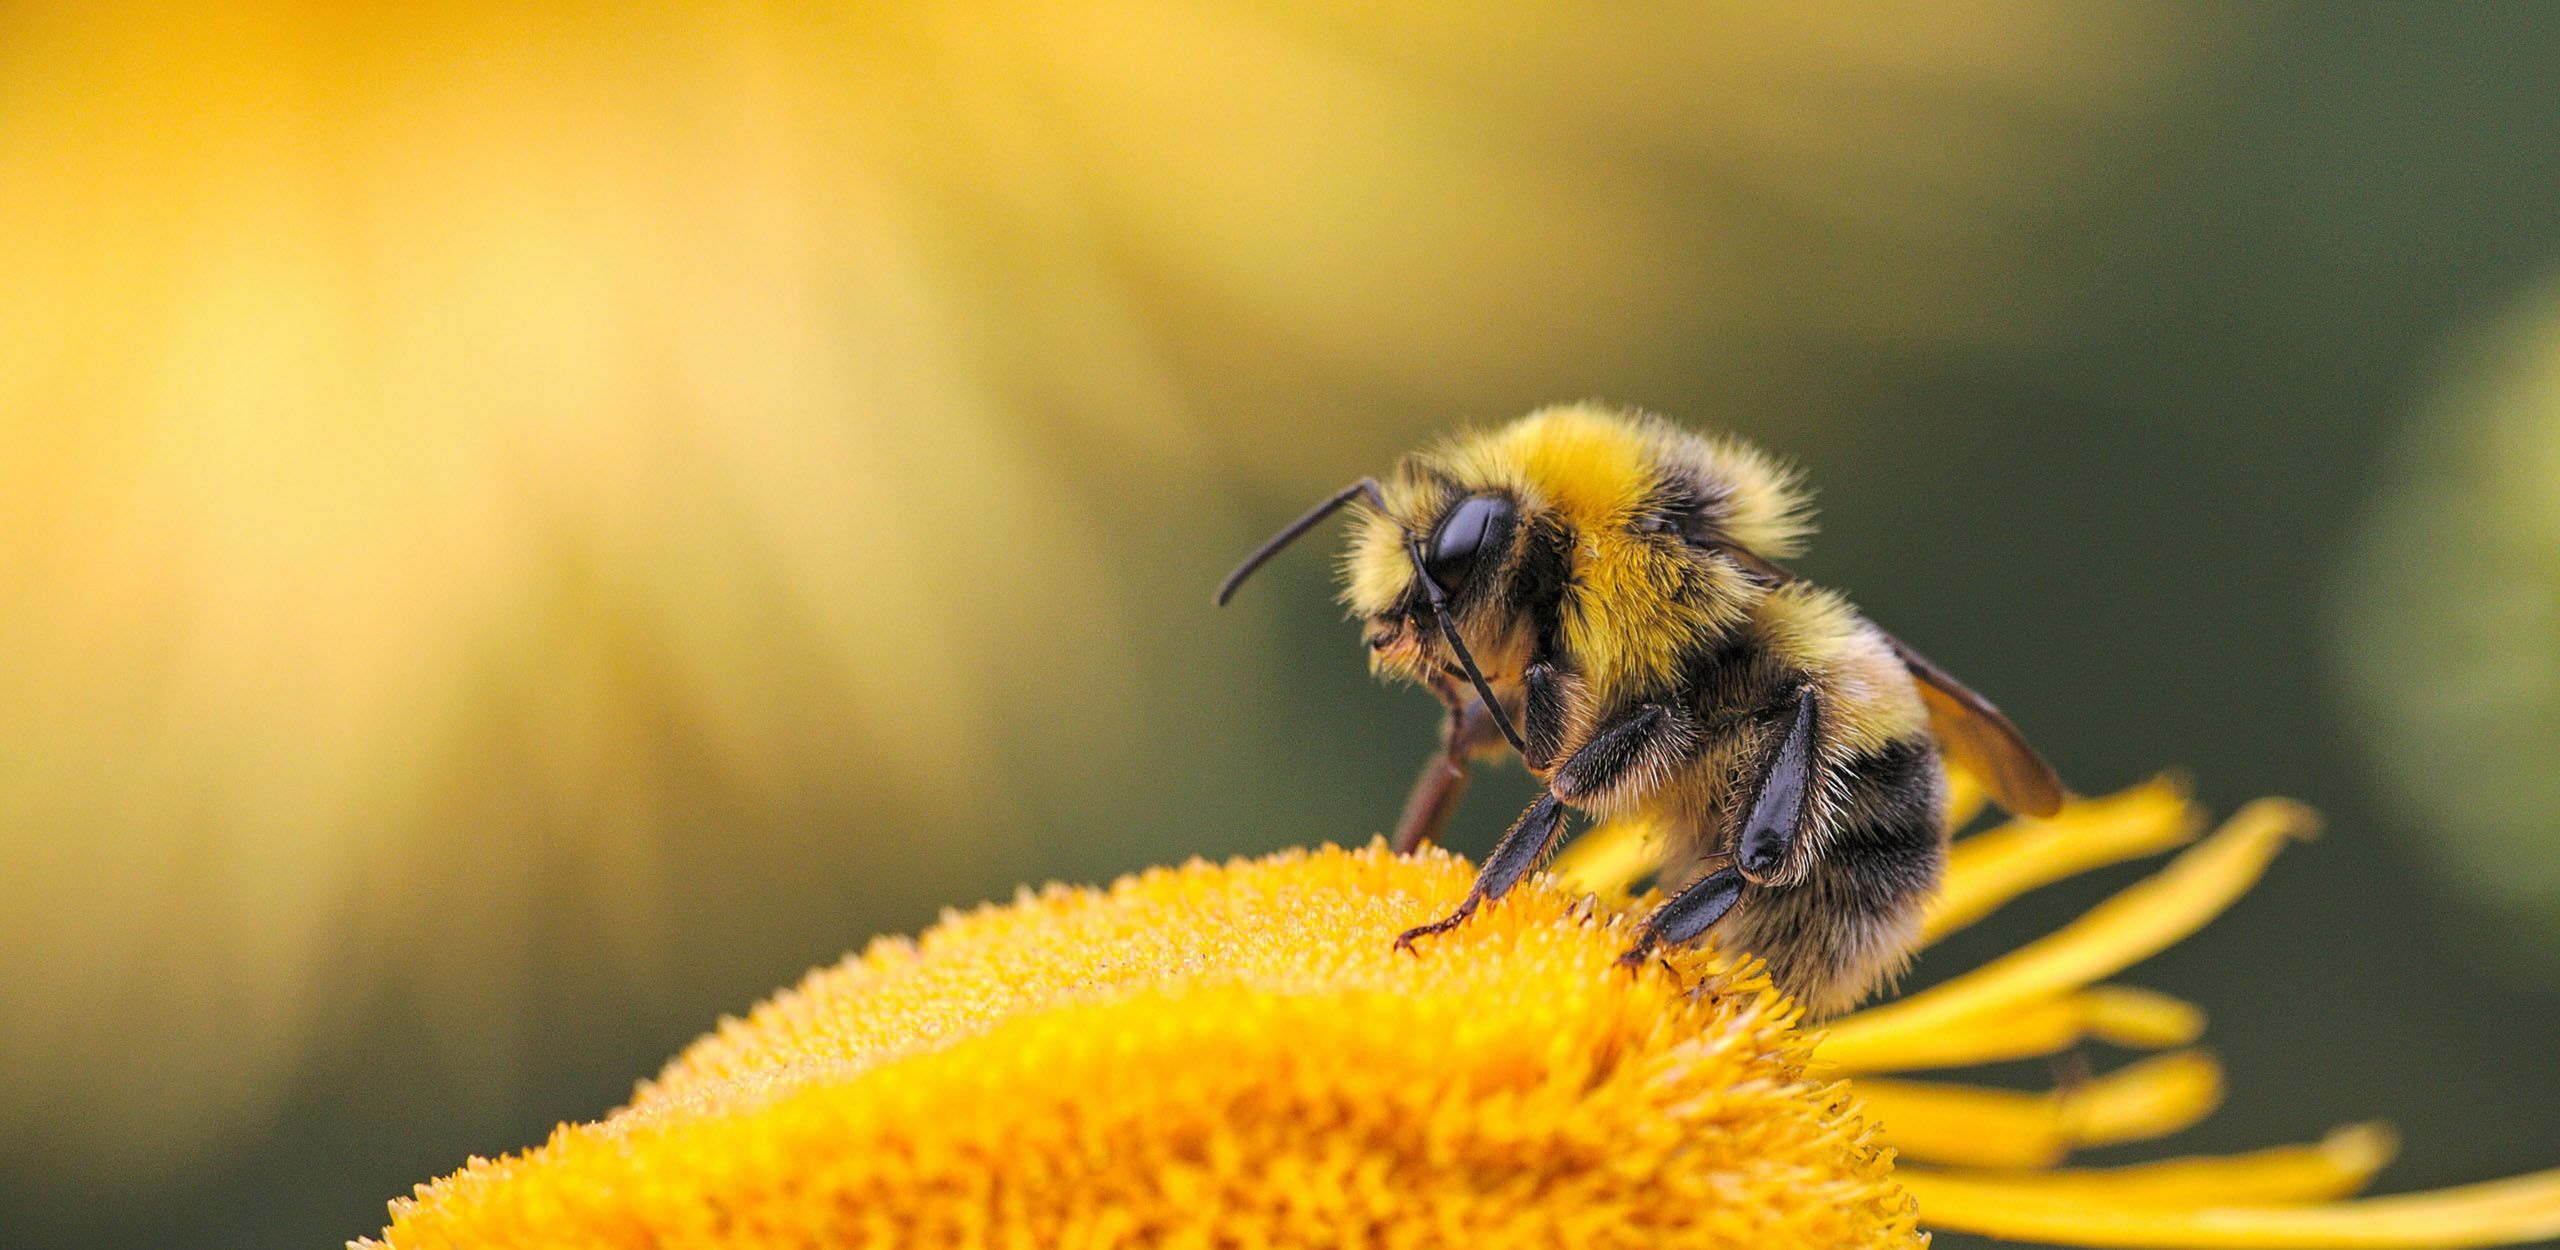 Bees: The First Aromatherapists